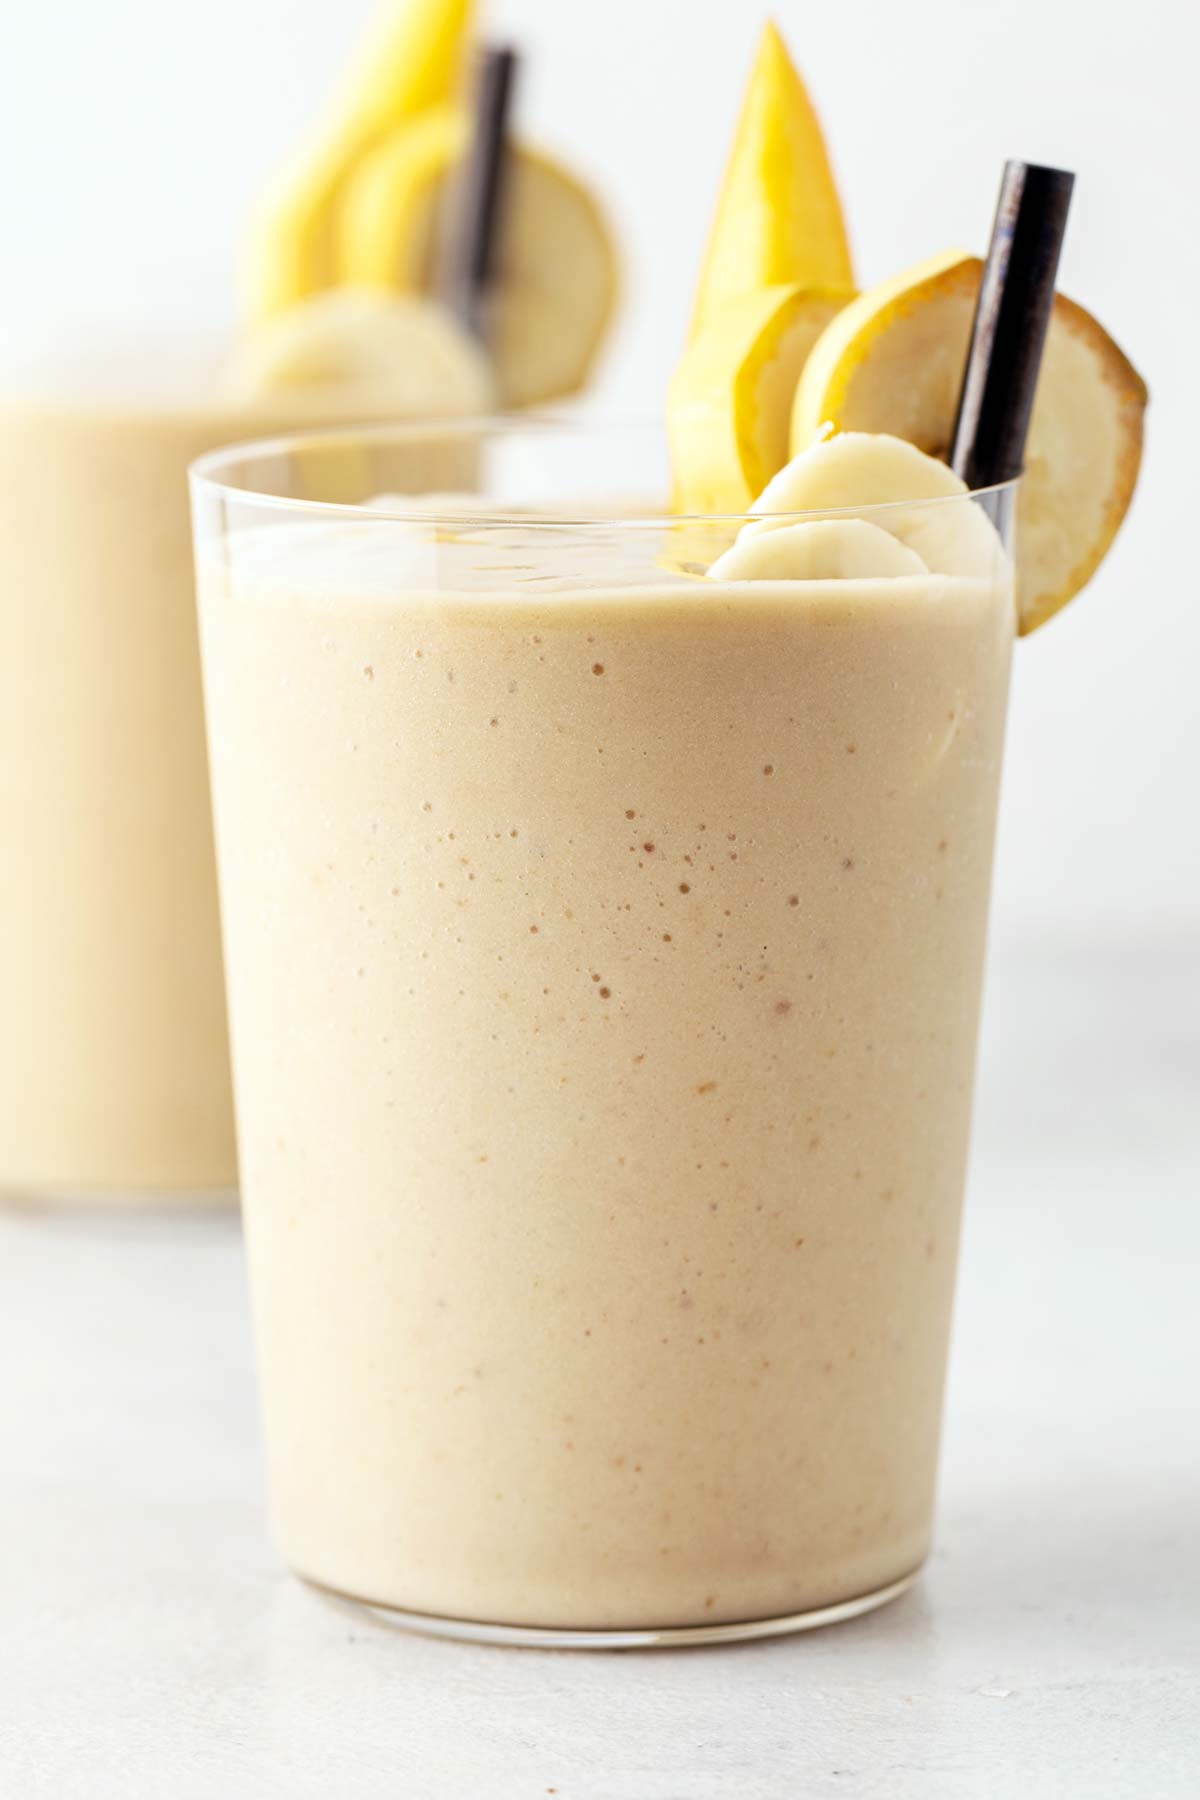 Coconut milk smoothie in a glass.